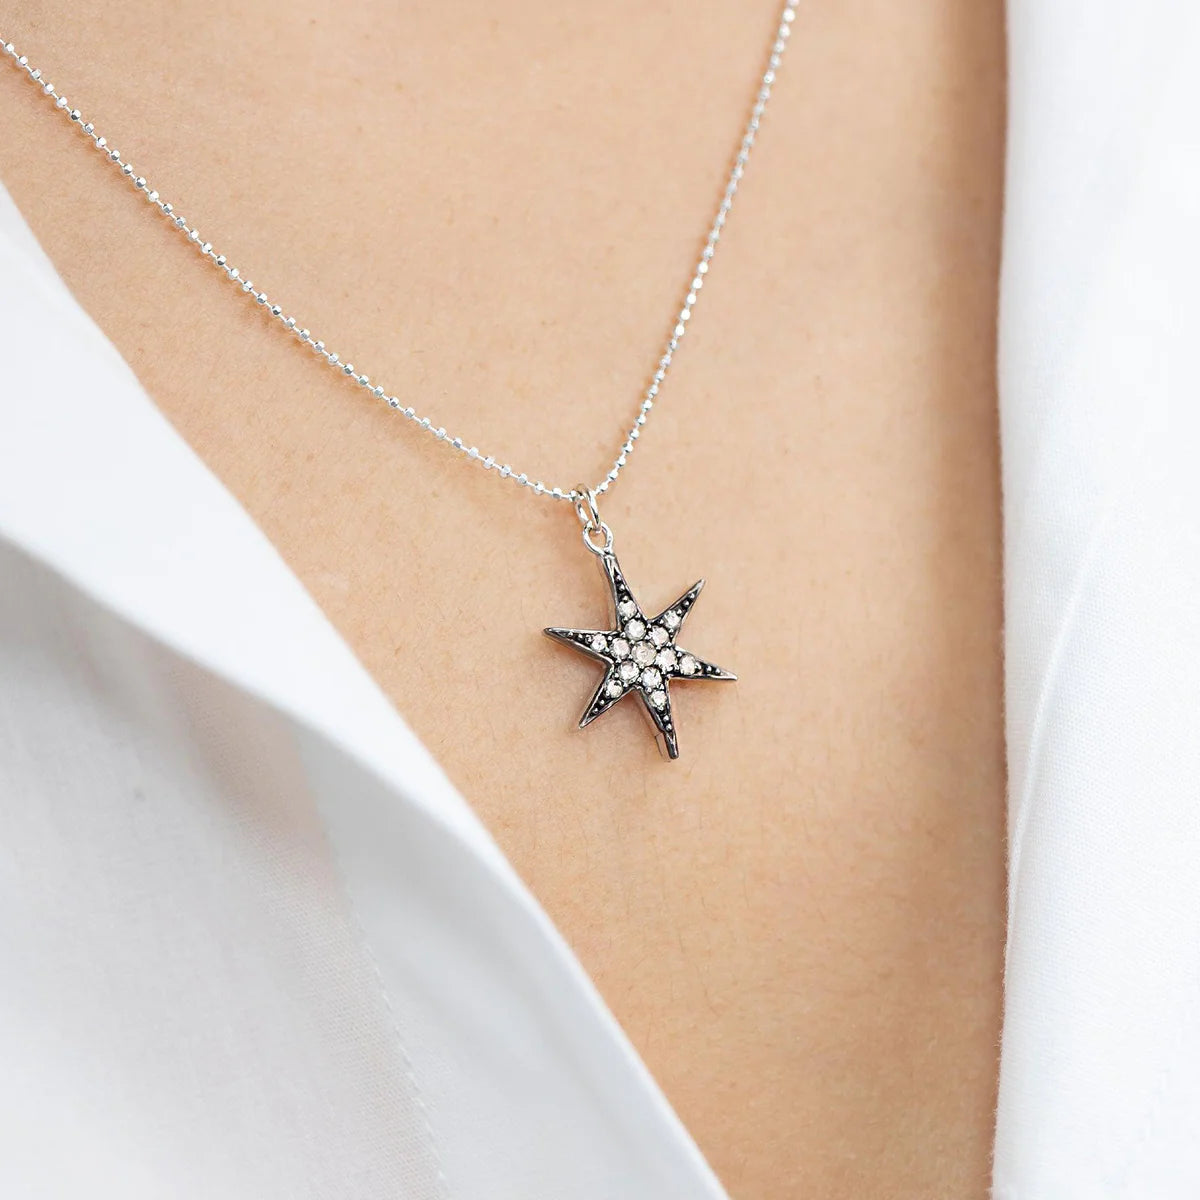 NEW-cosmic-star-necklace-SILVER_1200x.webp__PID:d0aba319-9f04-41c7-9e6e-01cce164087a